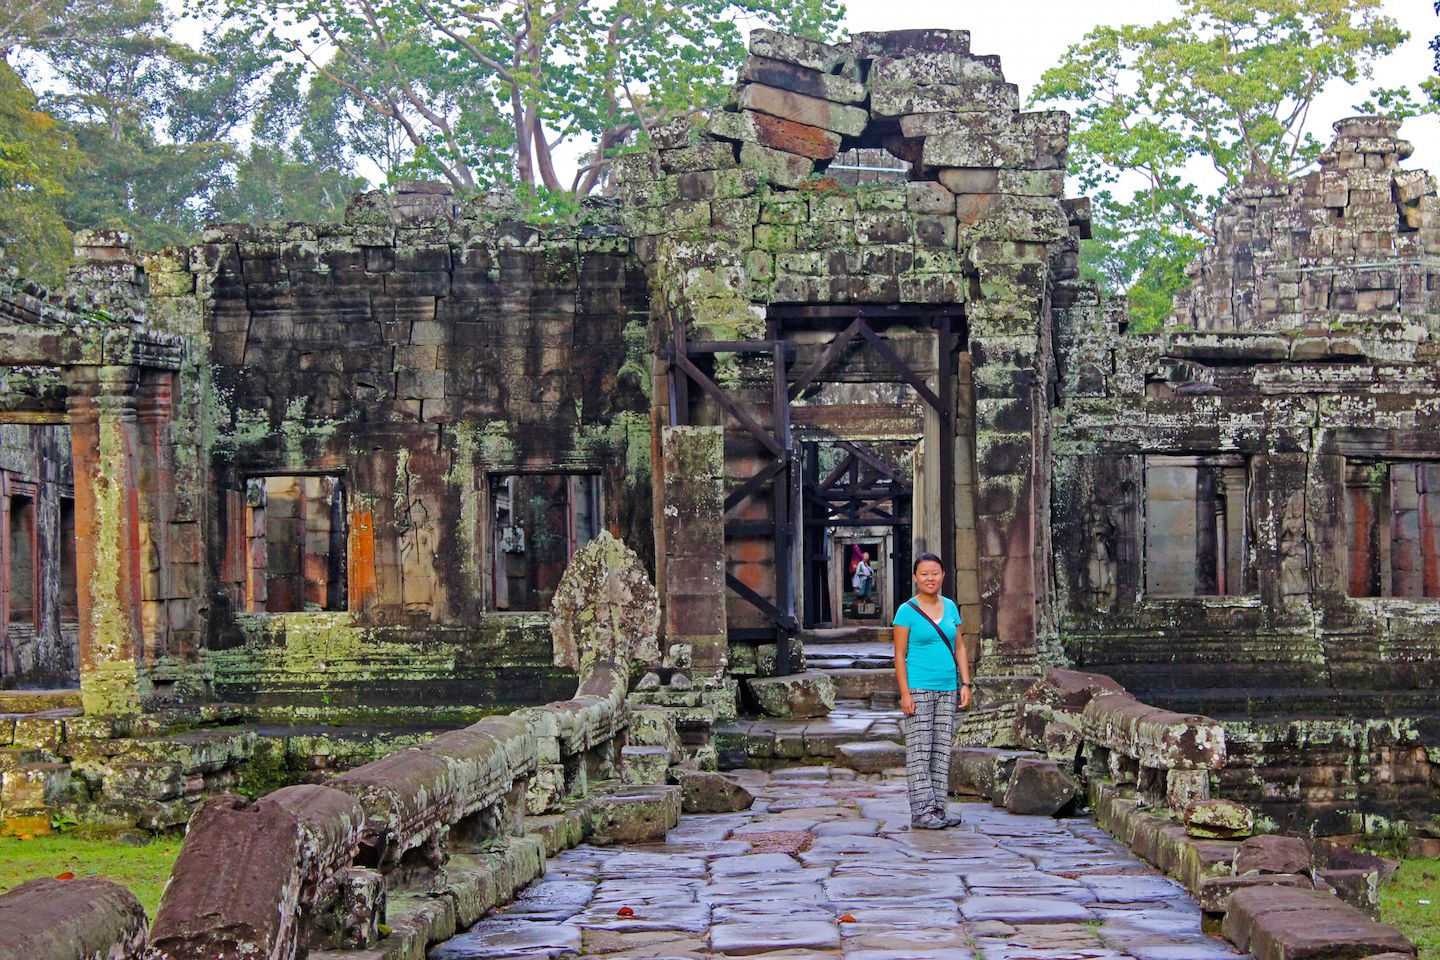 Julie on the causeway of Banteay Kdei